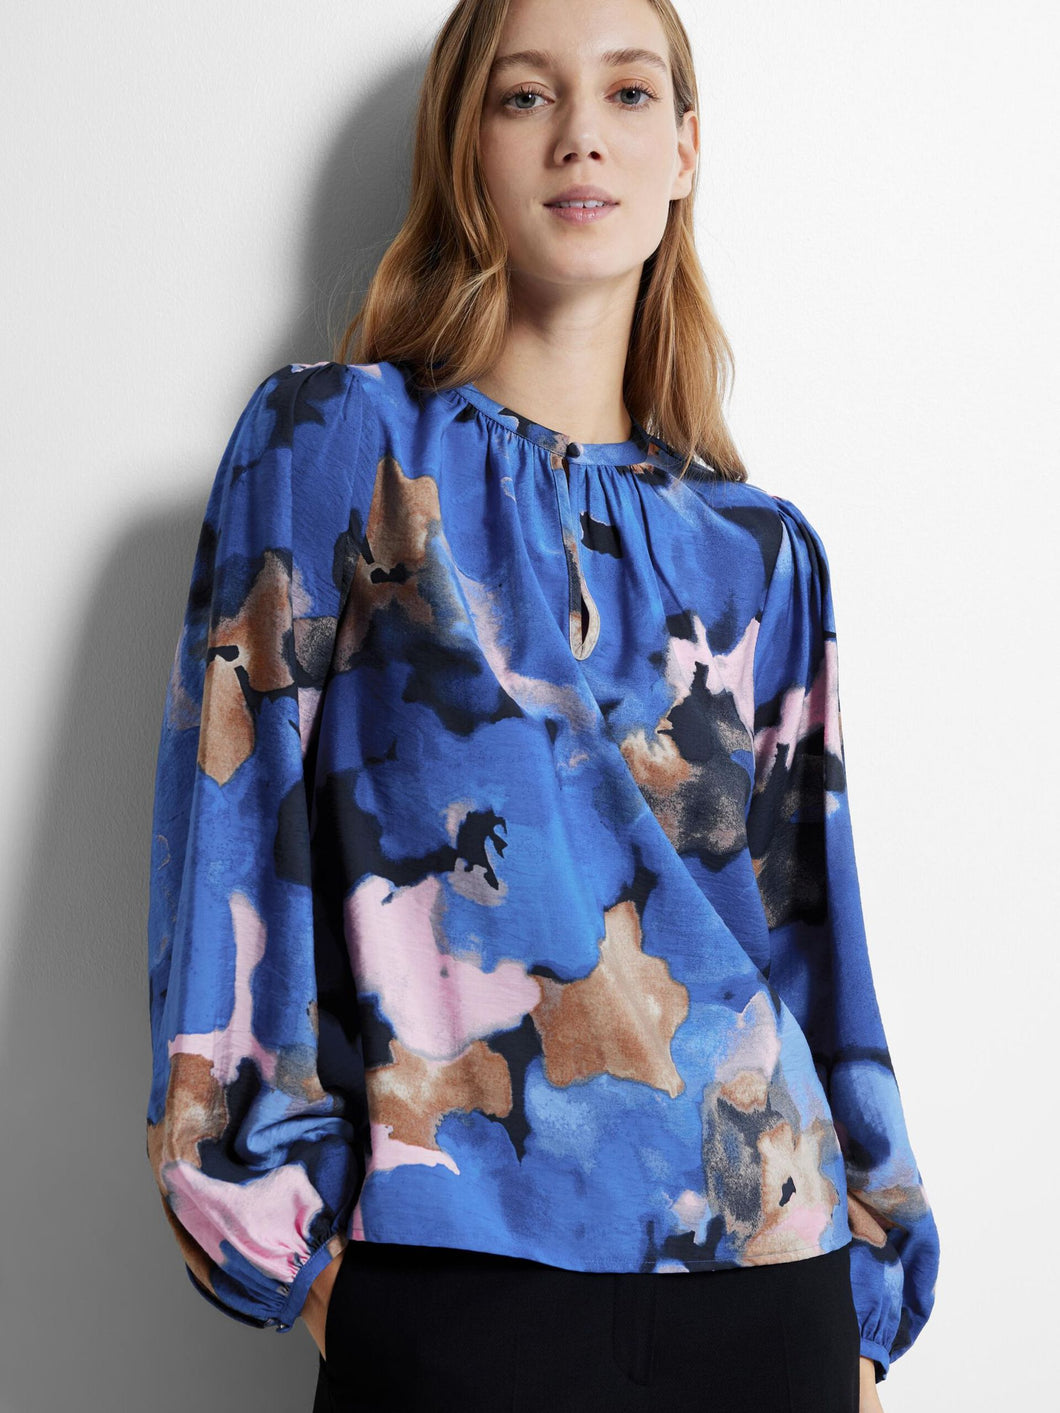 Selected Femme Mariette Abstract print blouse Dark sapphire